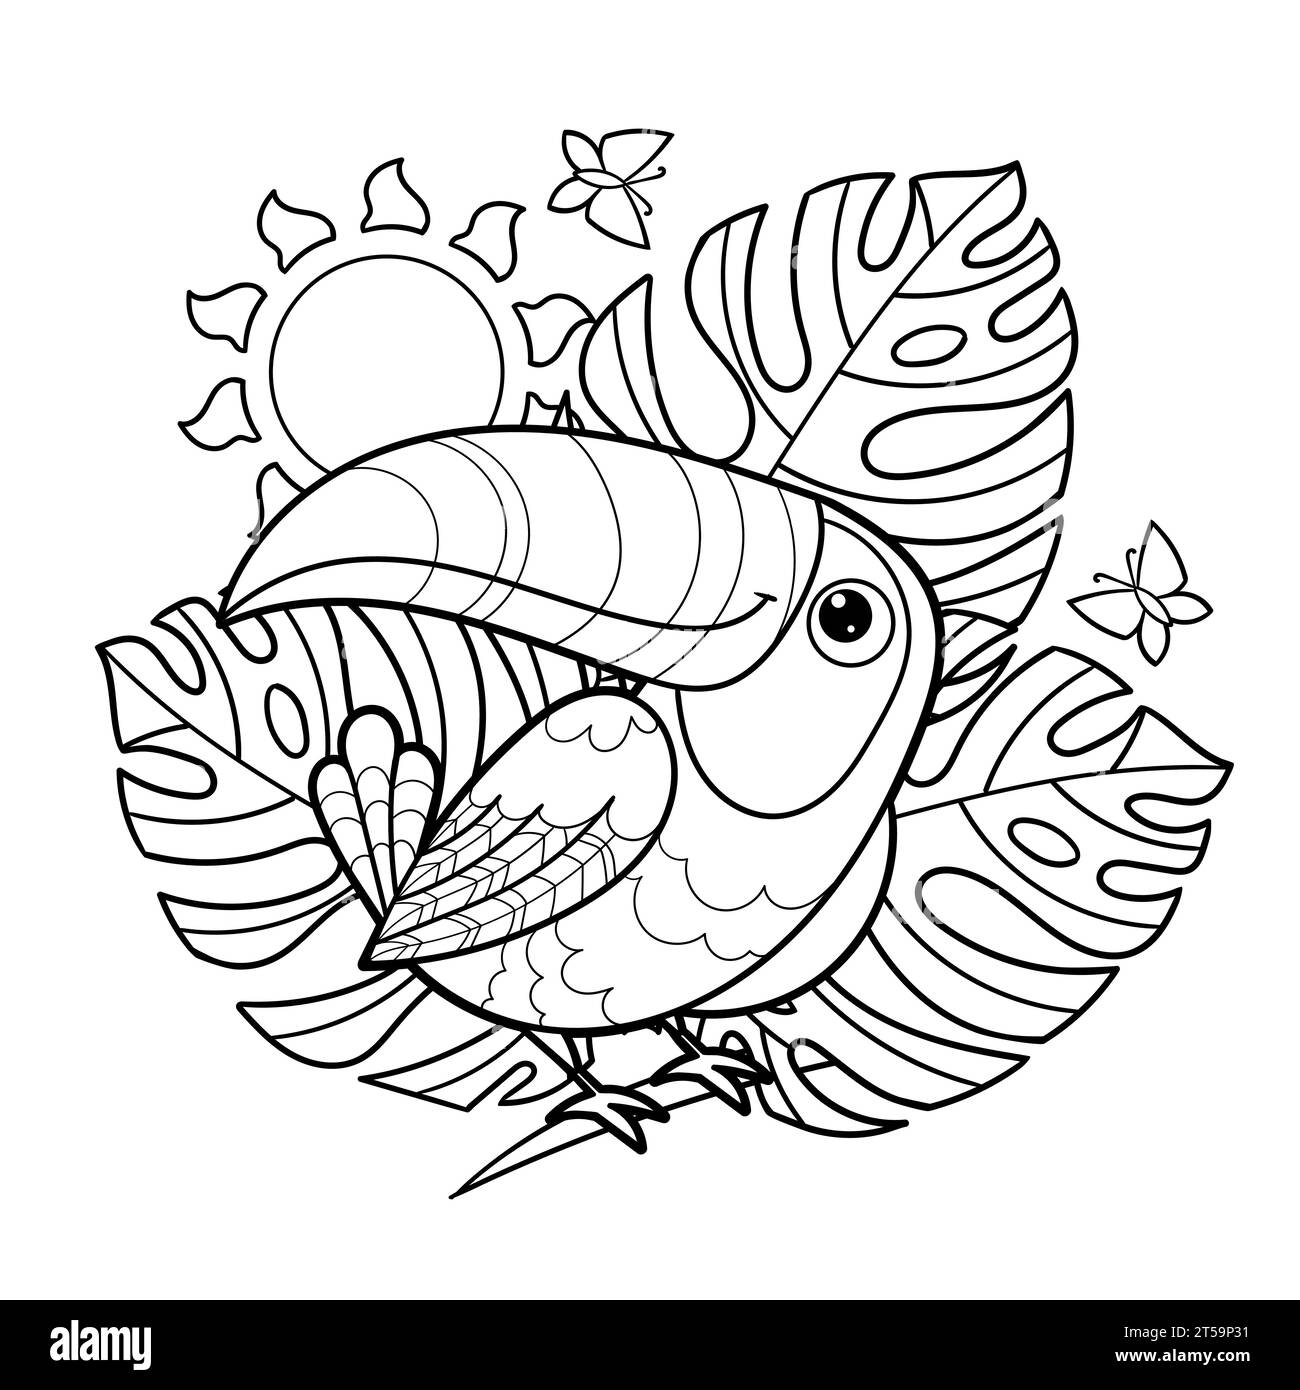 Coloring books Black and White Stock Photos & Images - Alamy